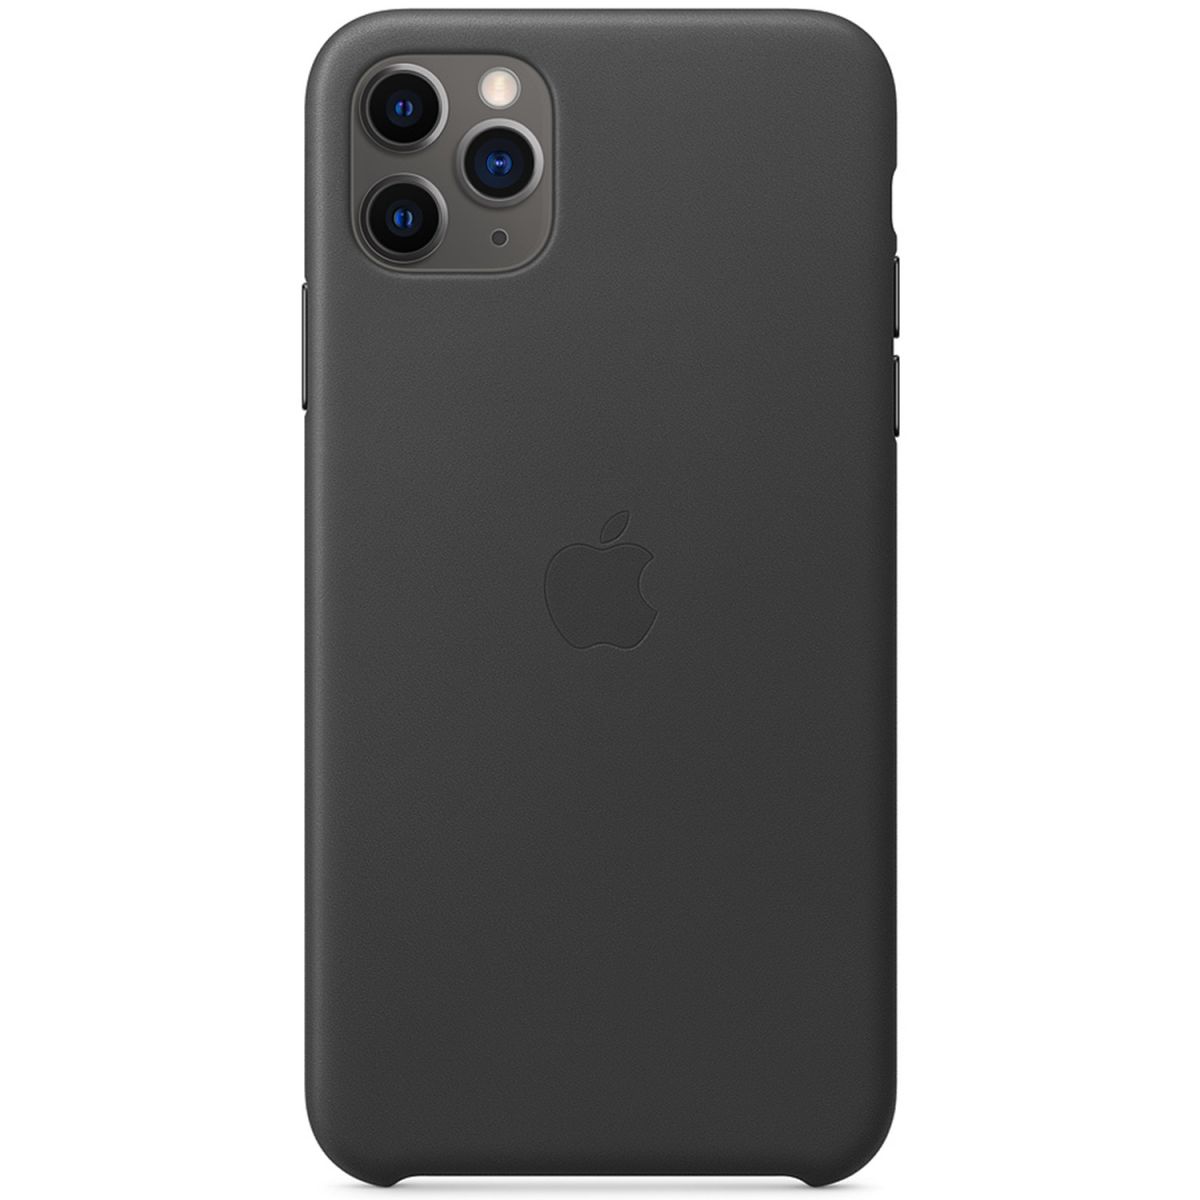 Apple Leather Backcover for iPhone 11 Pro - Black